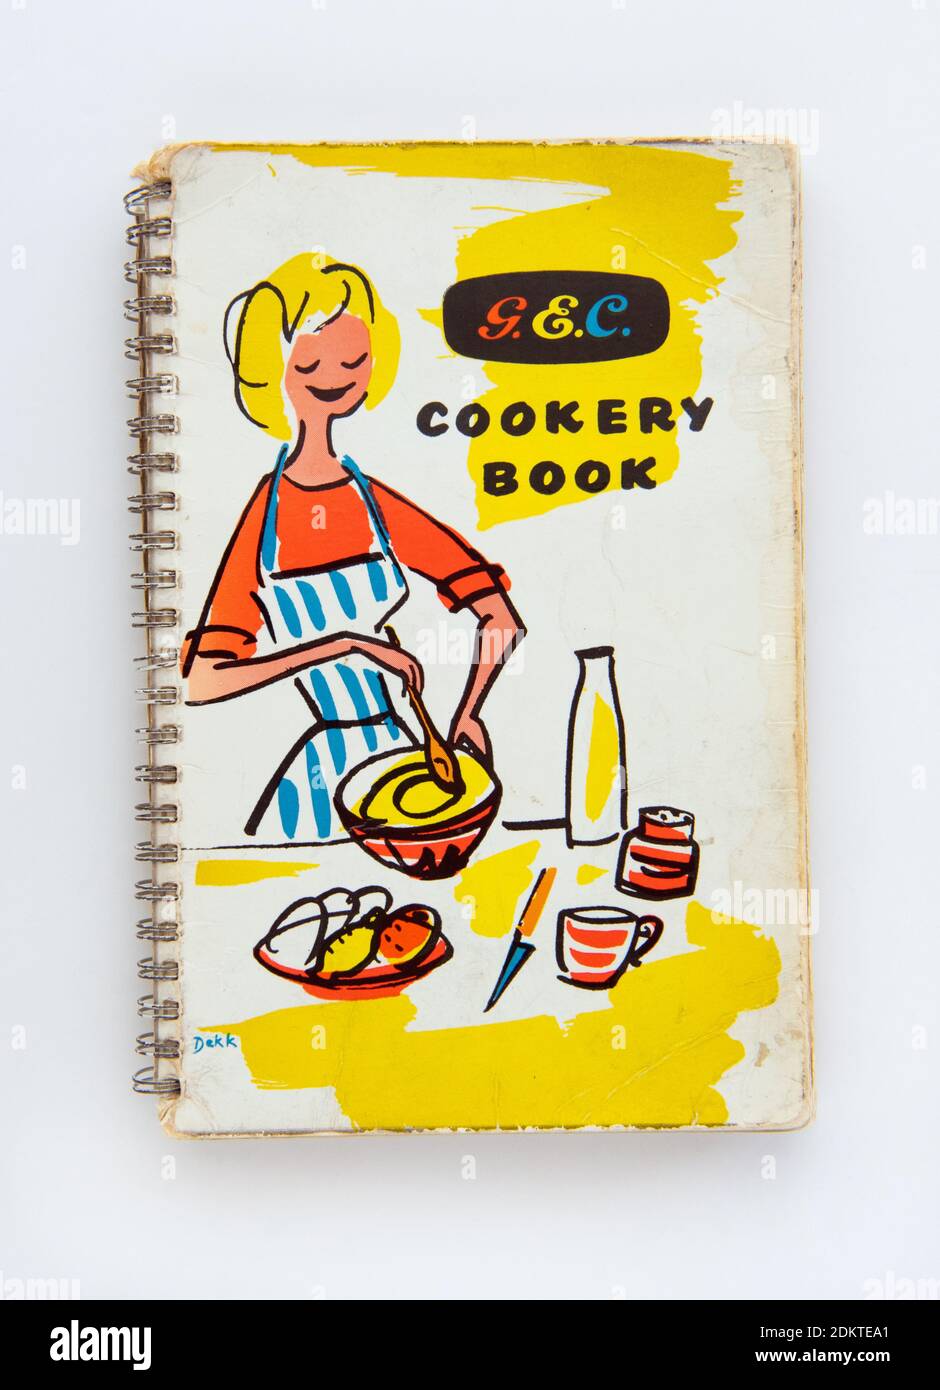 G.E.C General Electric Co Ltd vintage cookery book from the 1960s - UK Stock Photo